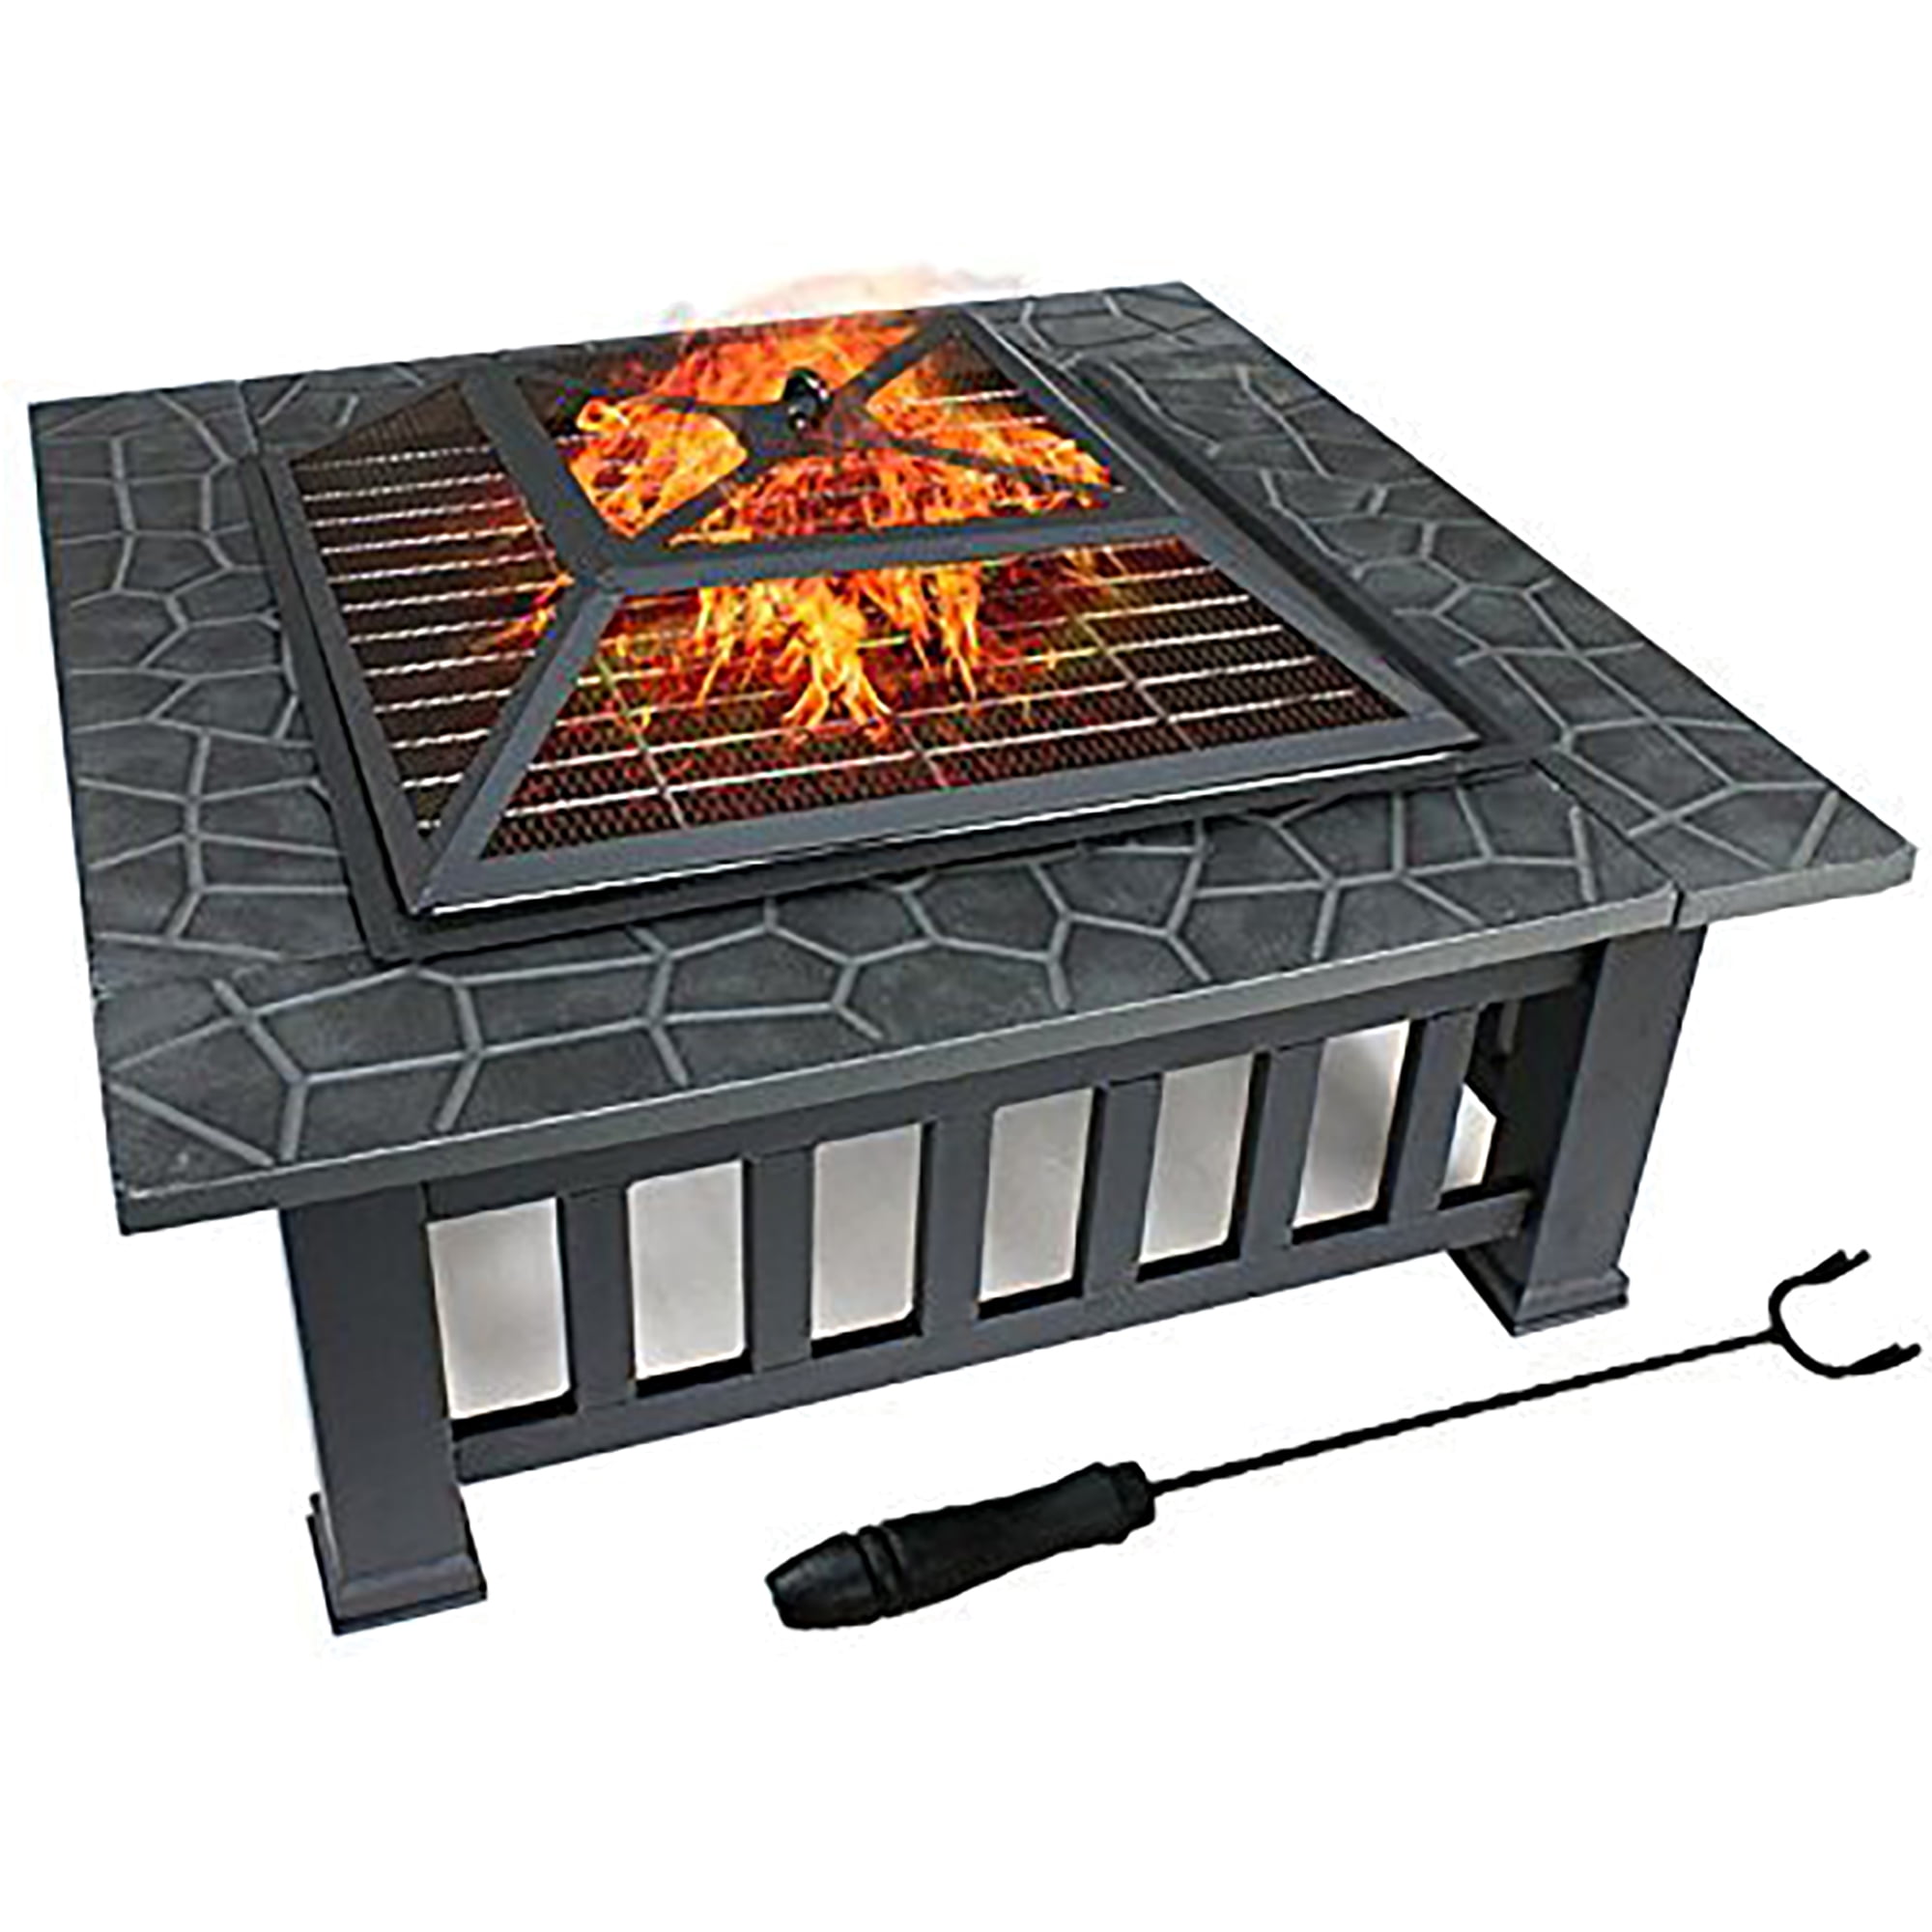 33'' Square Black Firepit Fire Pit BBQ Cover Backyard Outdoor Garden 